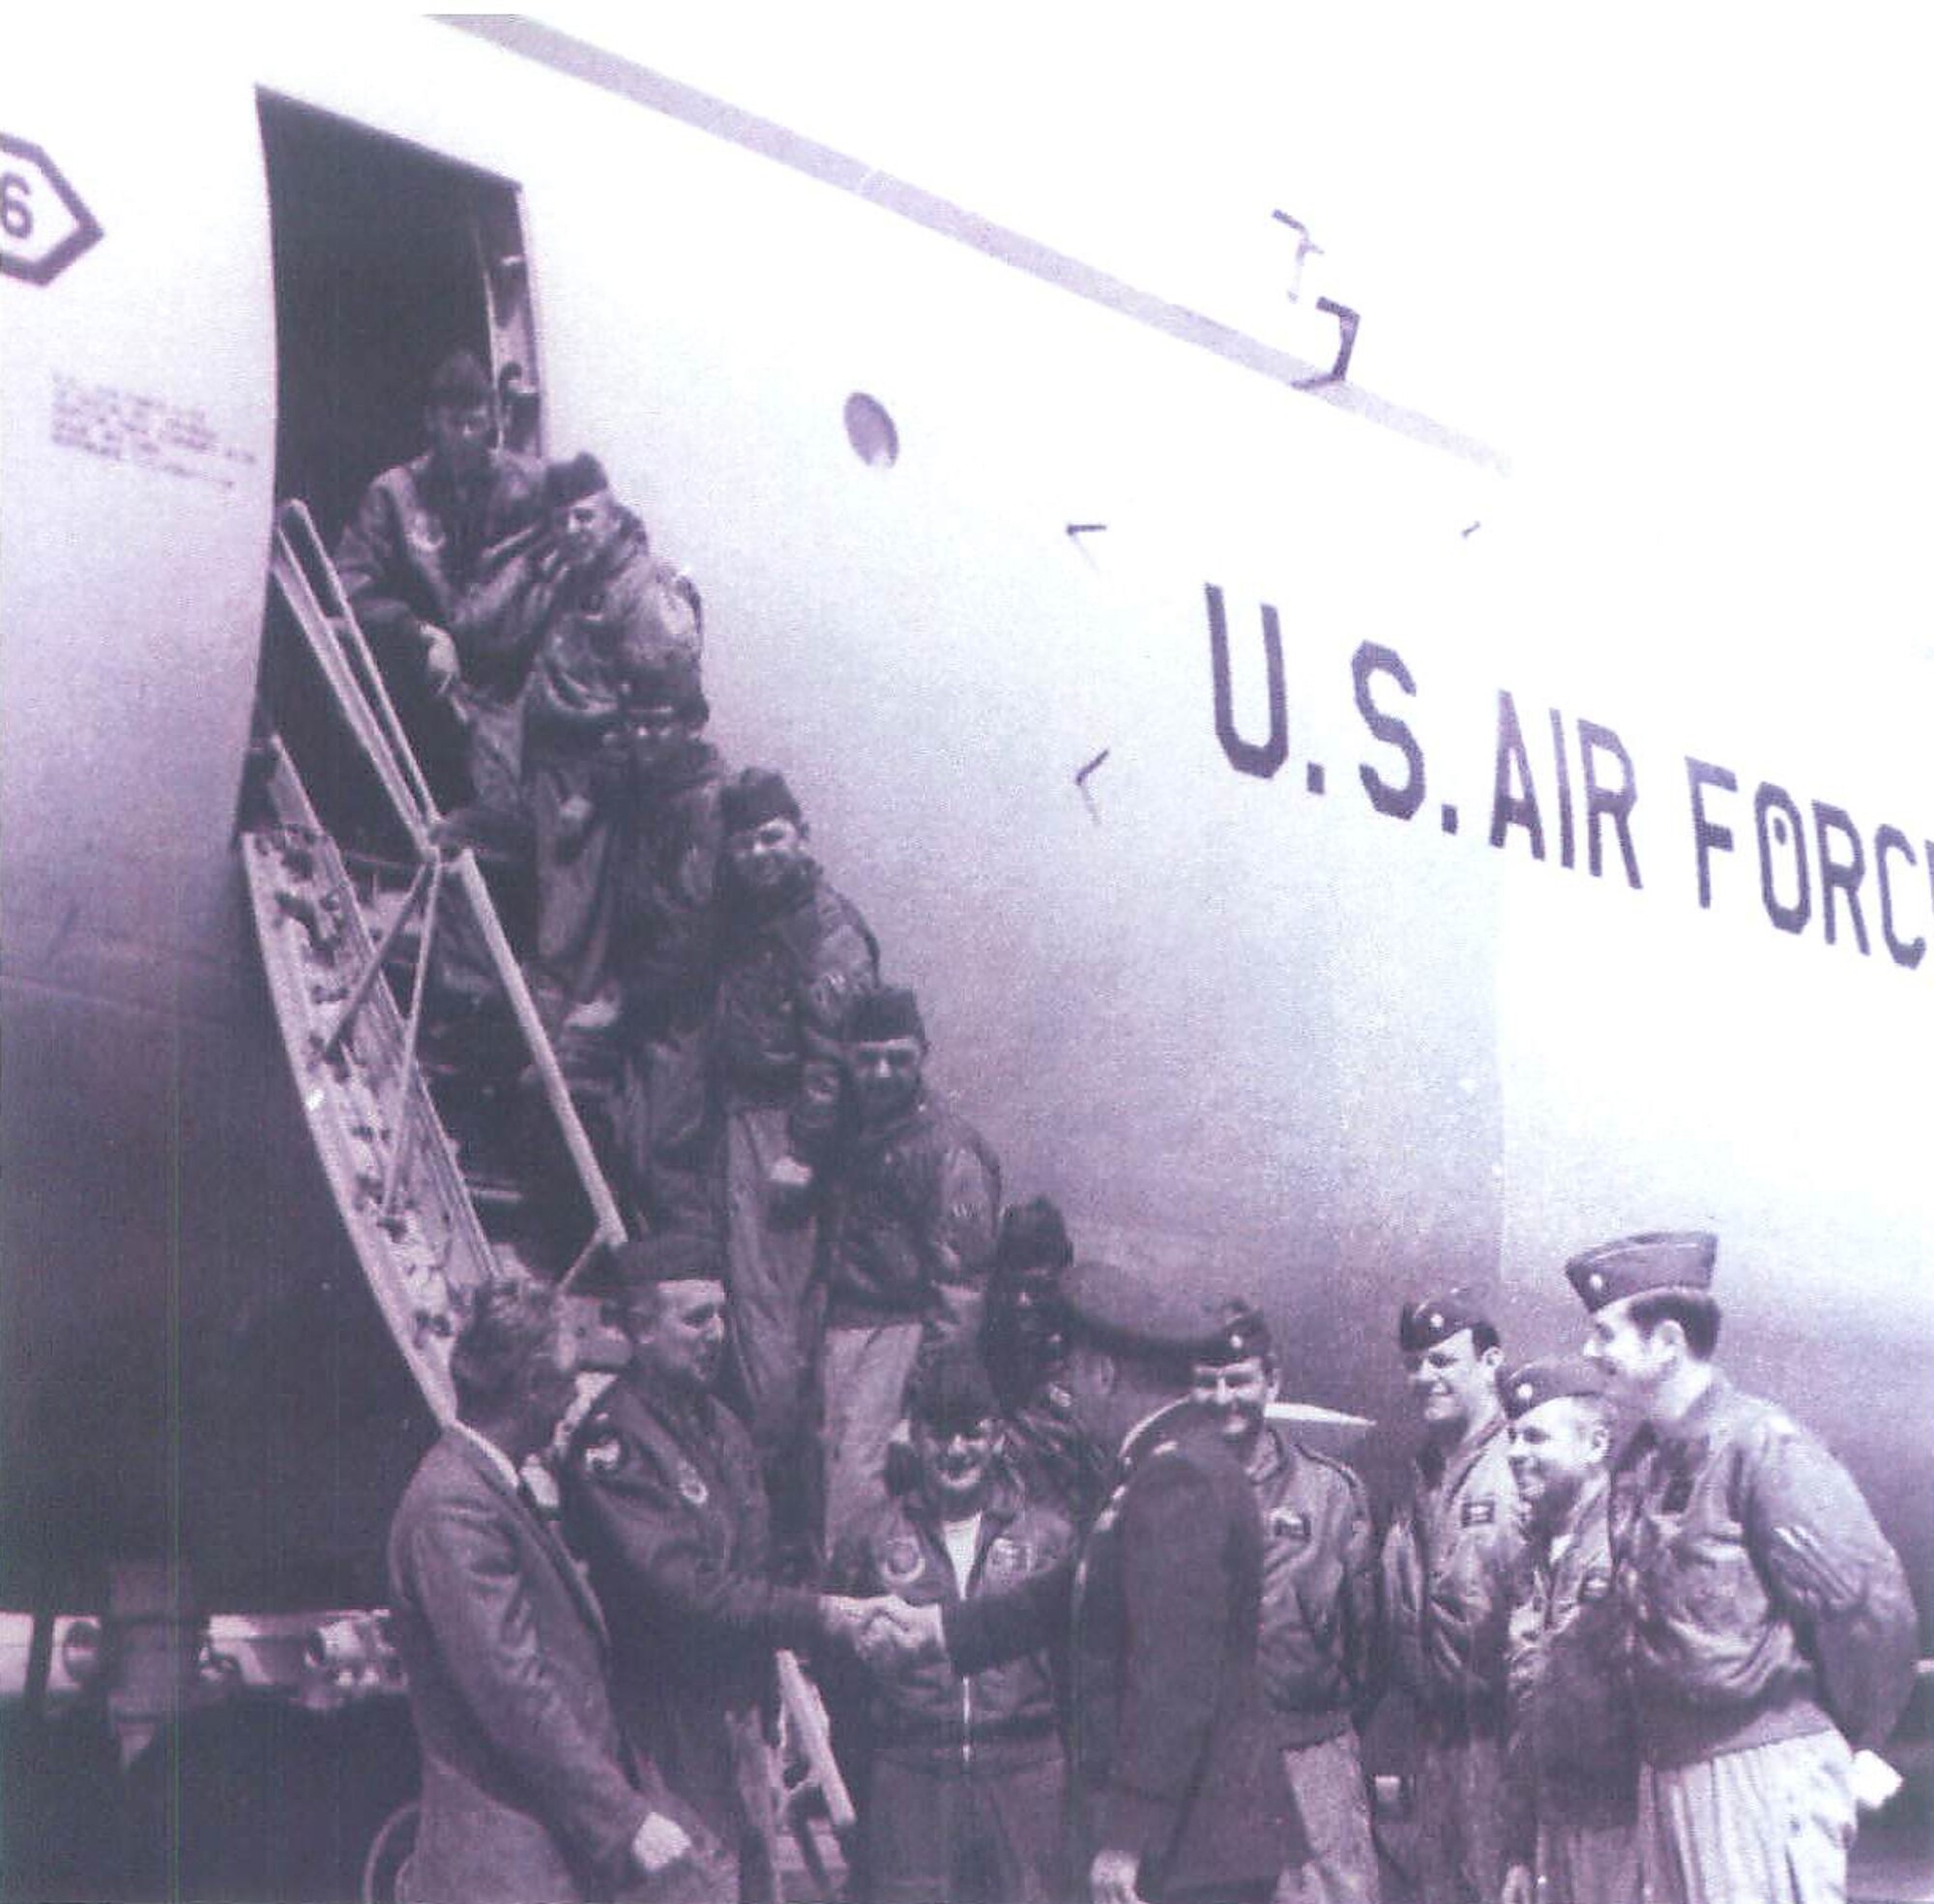 The crew who flew the first C-5 into Dover Air Force Base poses in front of the new Galaxy on Dover’s flighline April 16, 1971. Four of the crewmembers, Tom Dennis, Les Finney, Dr. Willie Curtis and Bob Valeski, were present once again on Dover AFB to witness a new era of military airlift Feb. 9, when Gen. Arthur J. Lichte, Air Mobility Command commander, delivered Team Dover’s first C-5M Super Galaxy named Spirit of Global Reach.  (Courtesy photo)